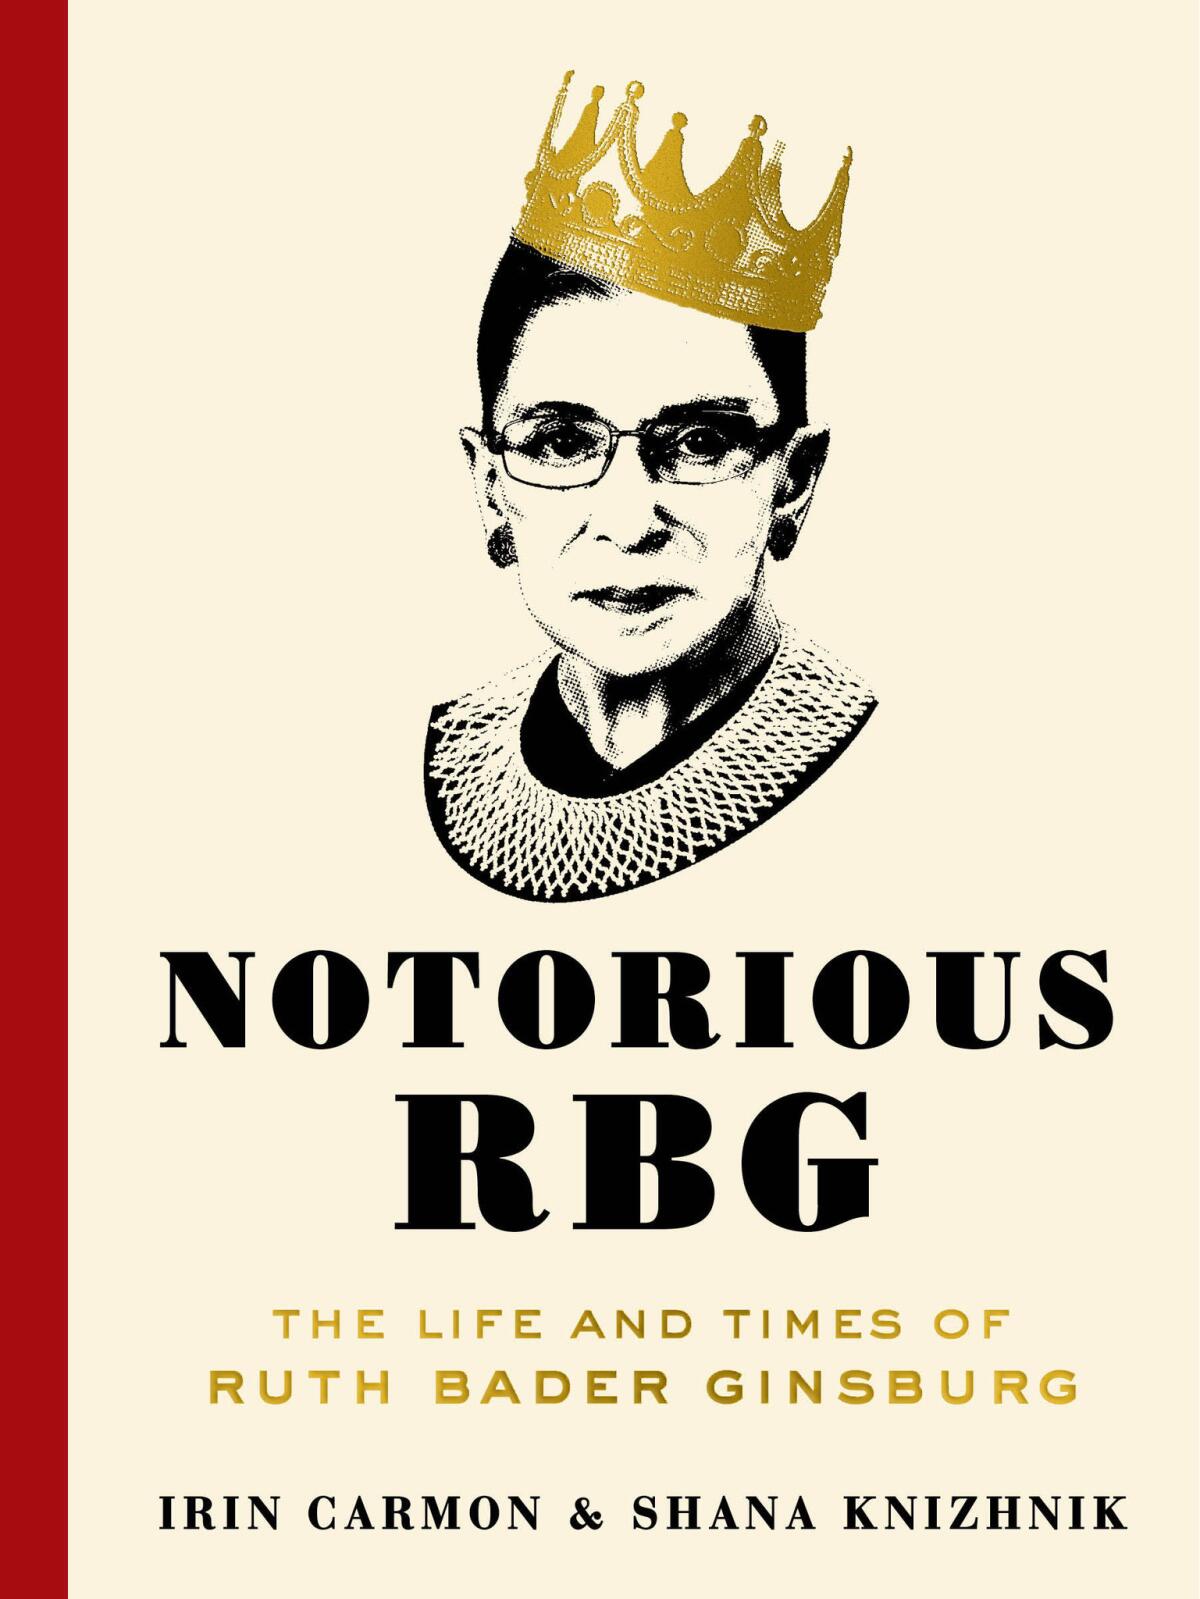 "Notorious RBG: The Life and Times of Ruth Bader Ginsberg" by Irin Carmon and Shana Knizhnik